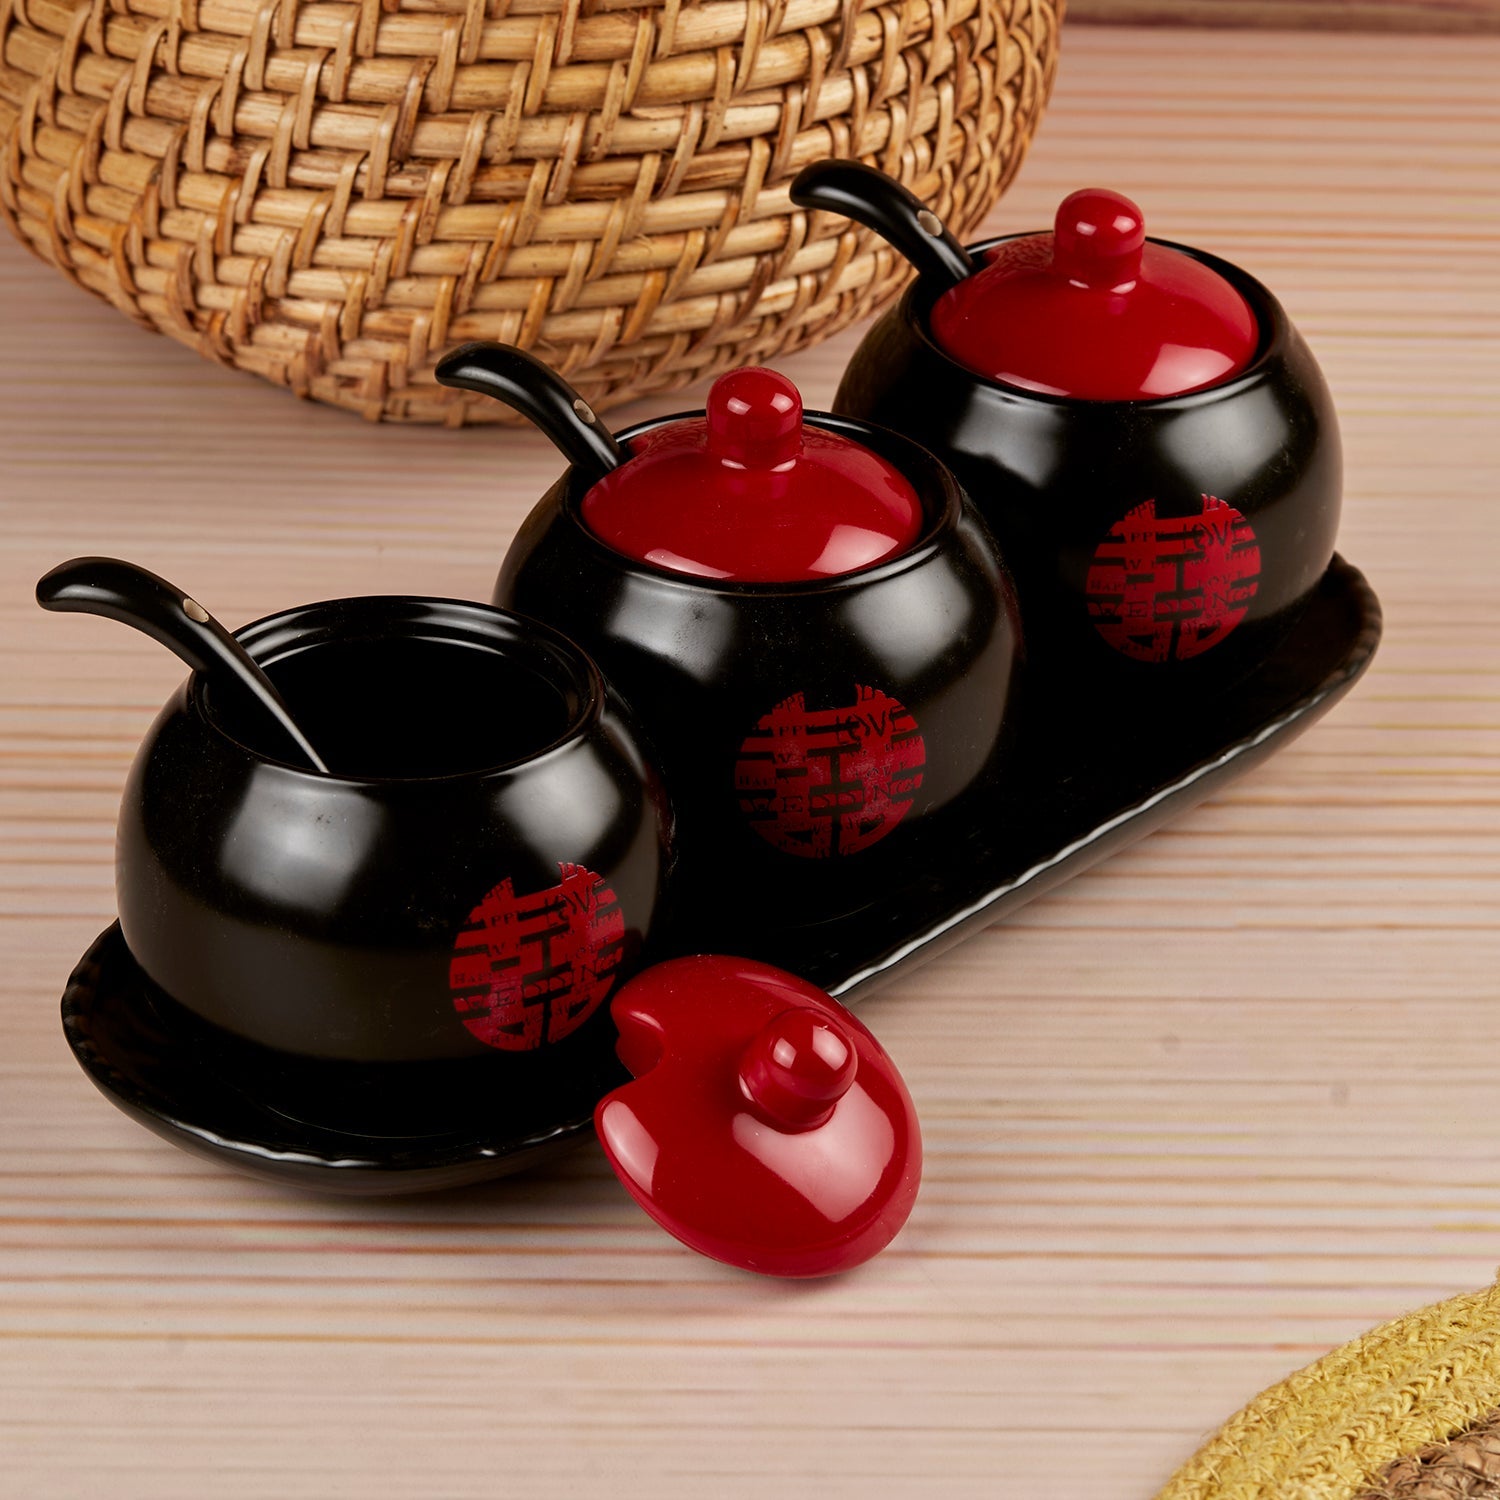 Ceramic Condiment Jars and Containers Set of 3 with Tray and Spoon for Kitchen (10680)